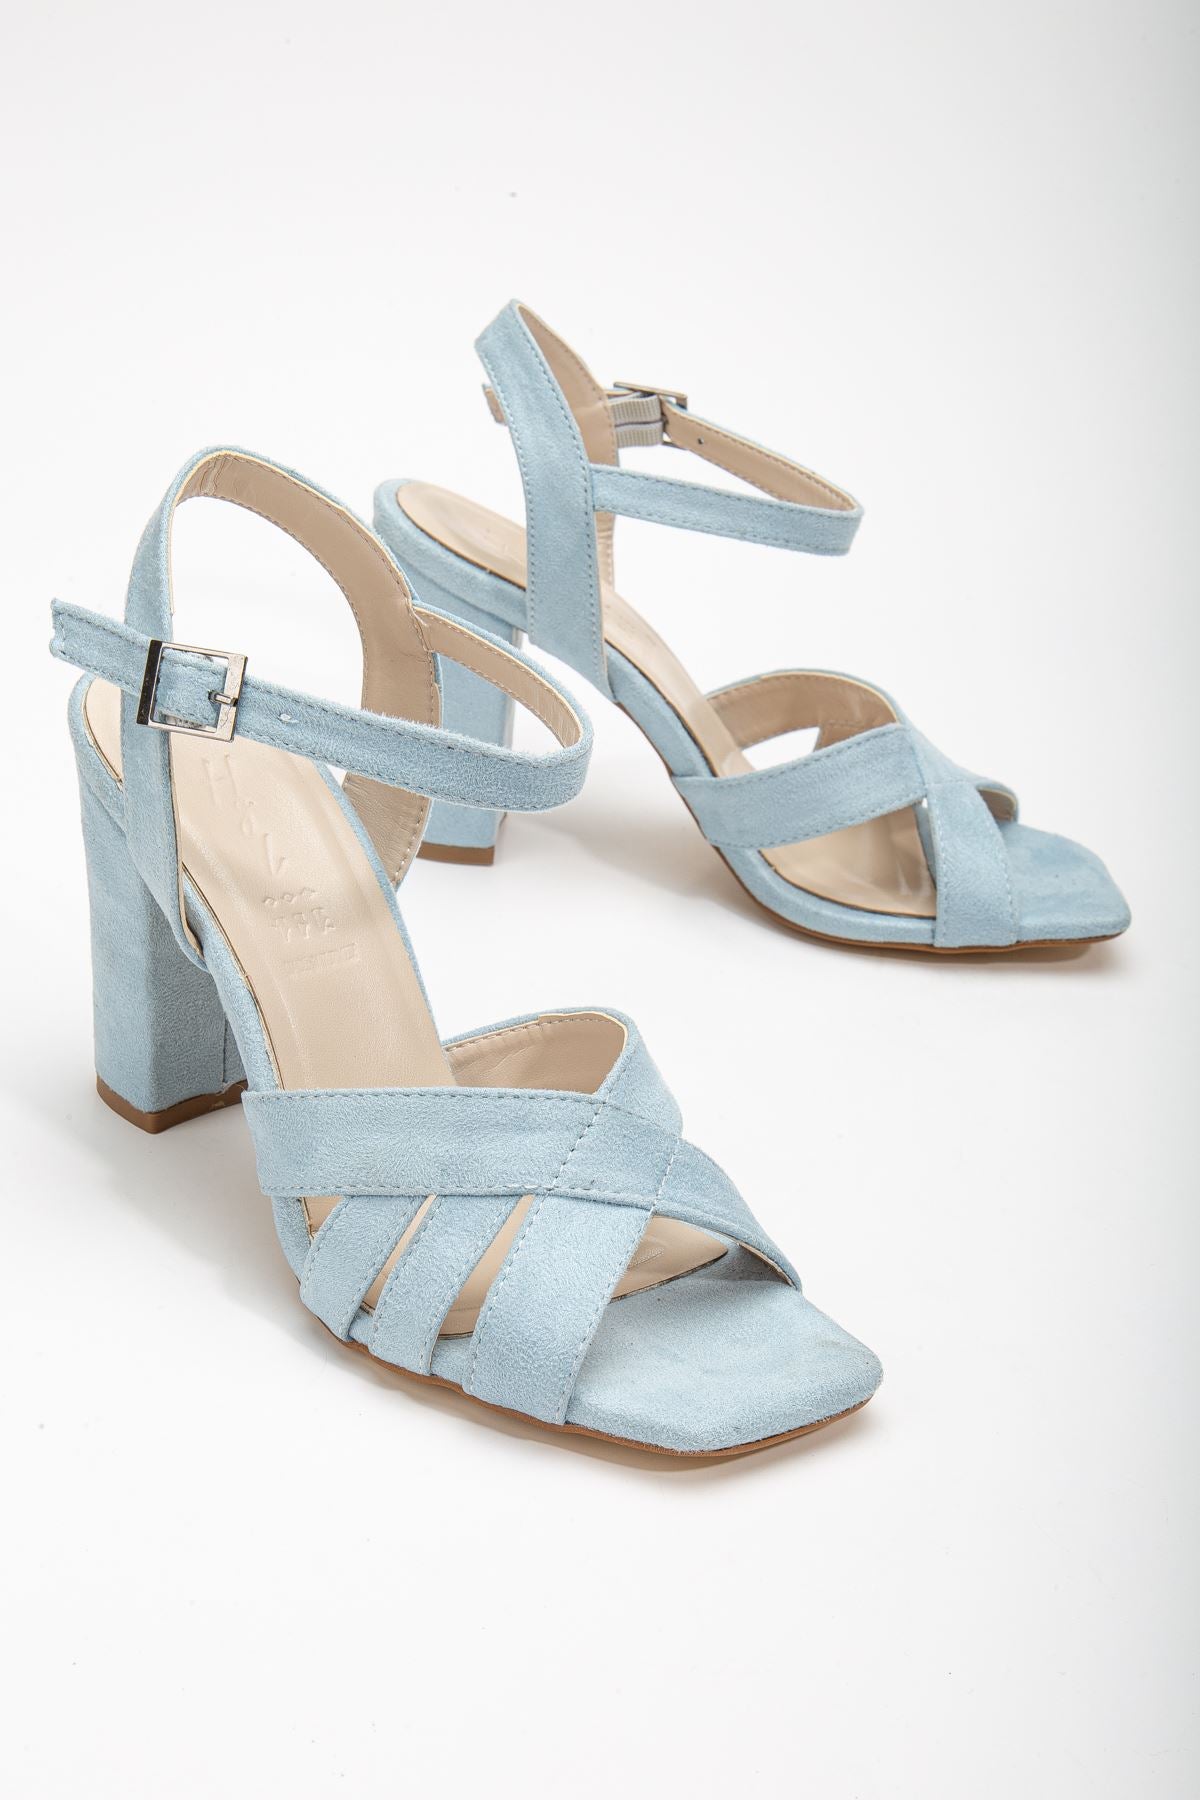 Hope High Heeled Baby Blue Suede Blunt Toe Women's Shoes - STREETMODE™